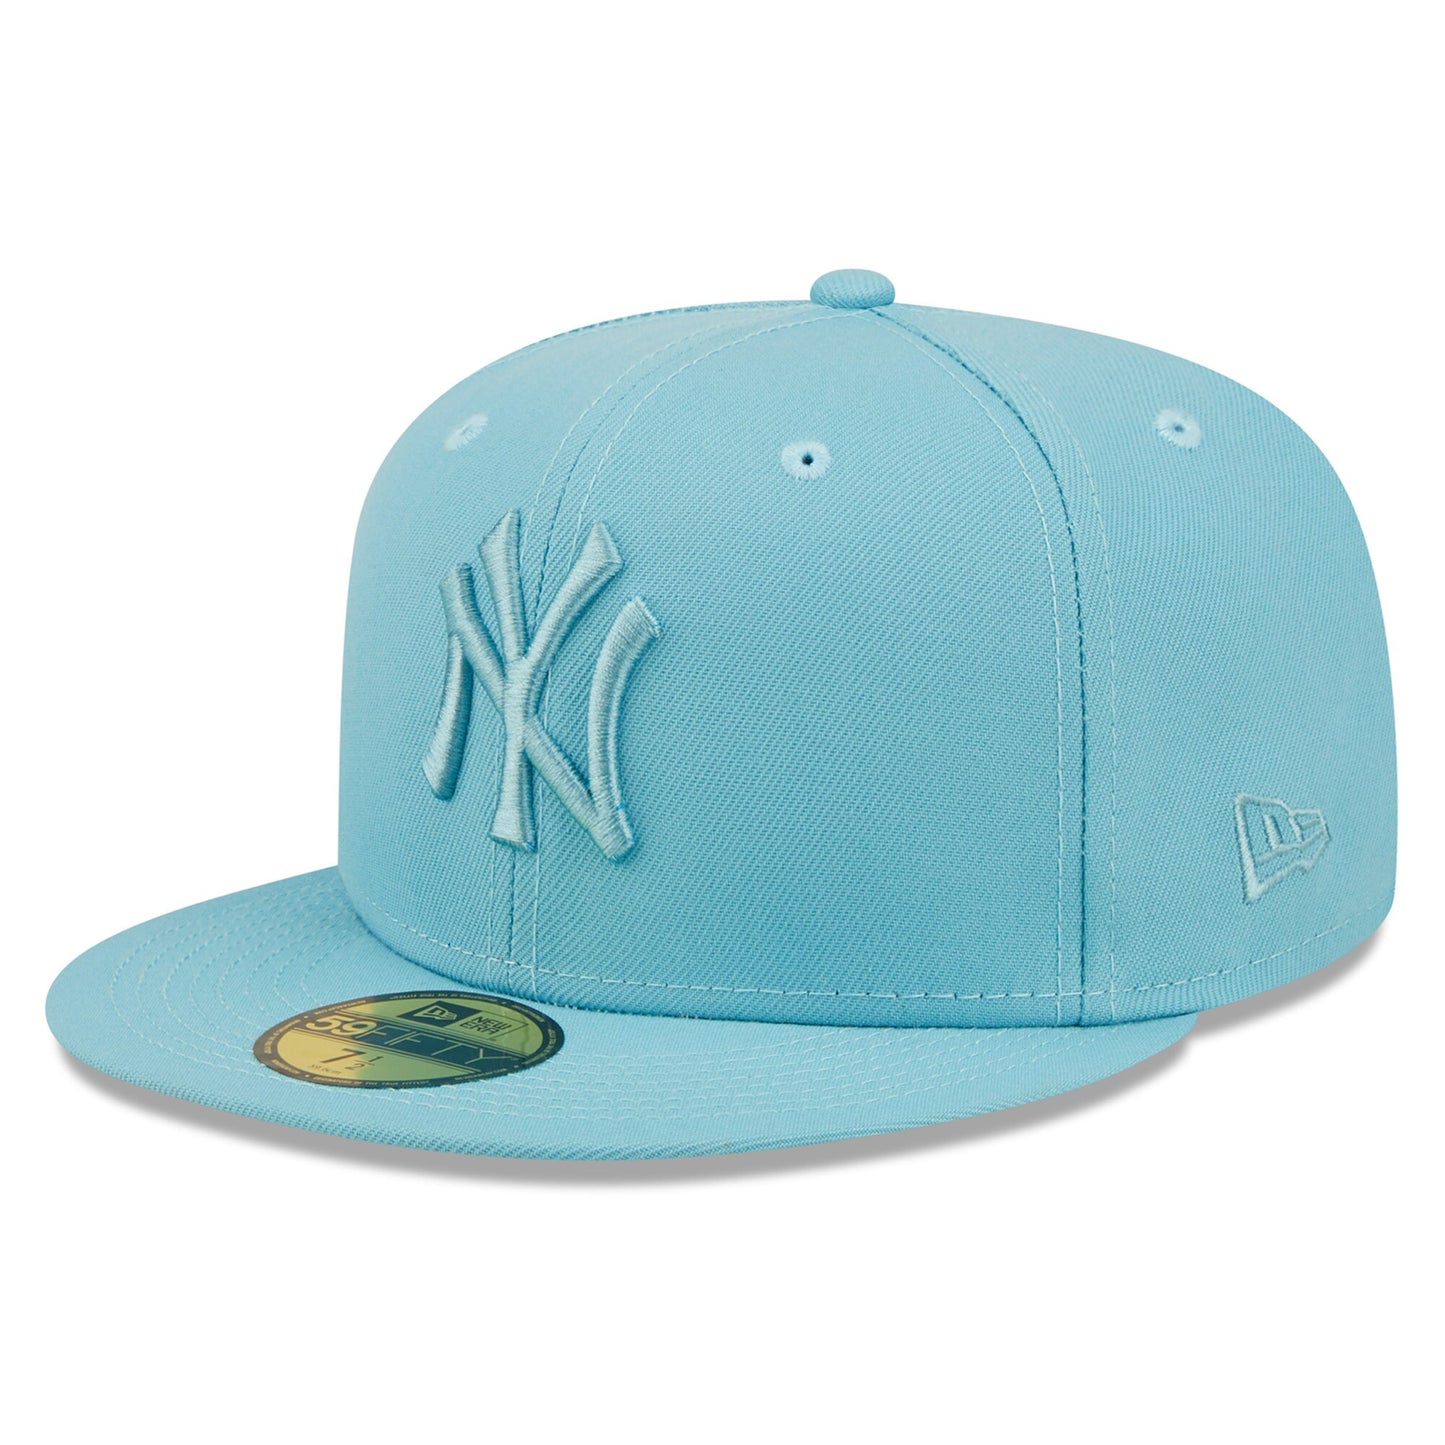 New York Yankees New Era Color Pack 59FIFTY Fitted Hat - Light Blue